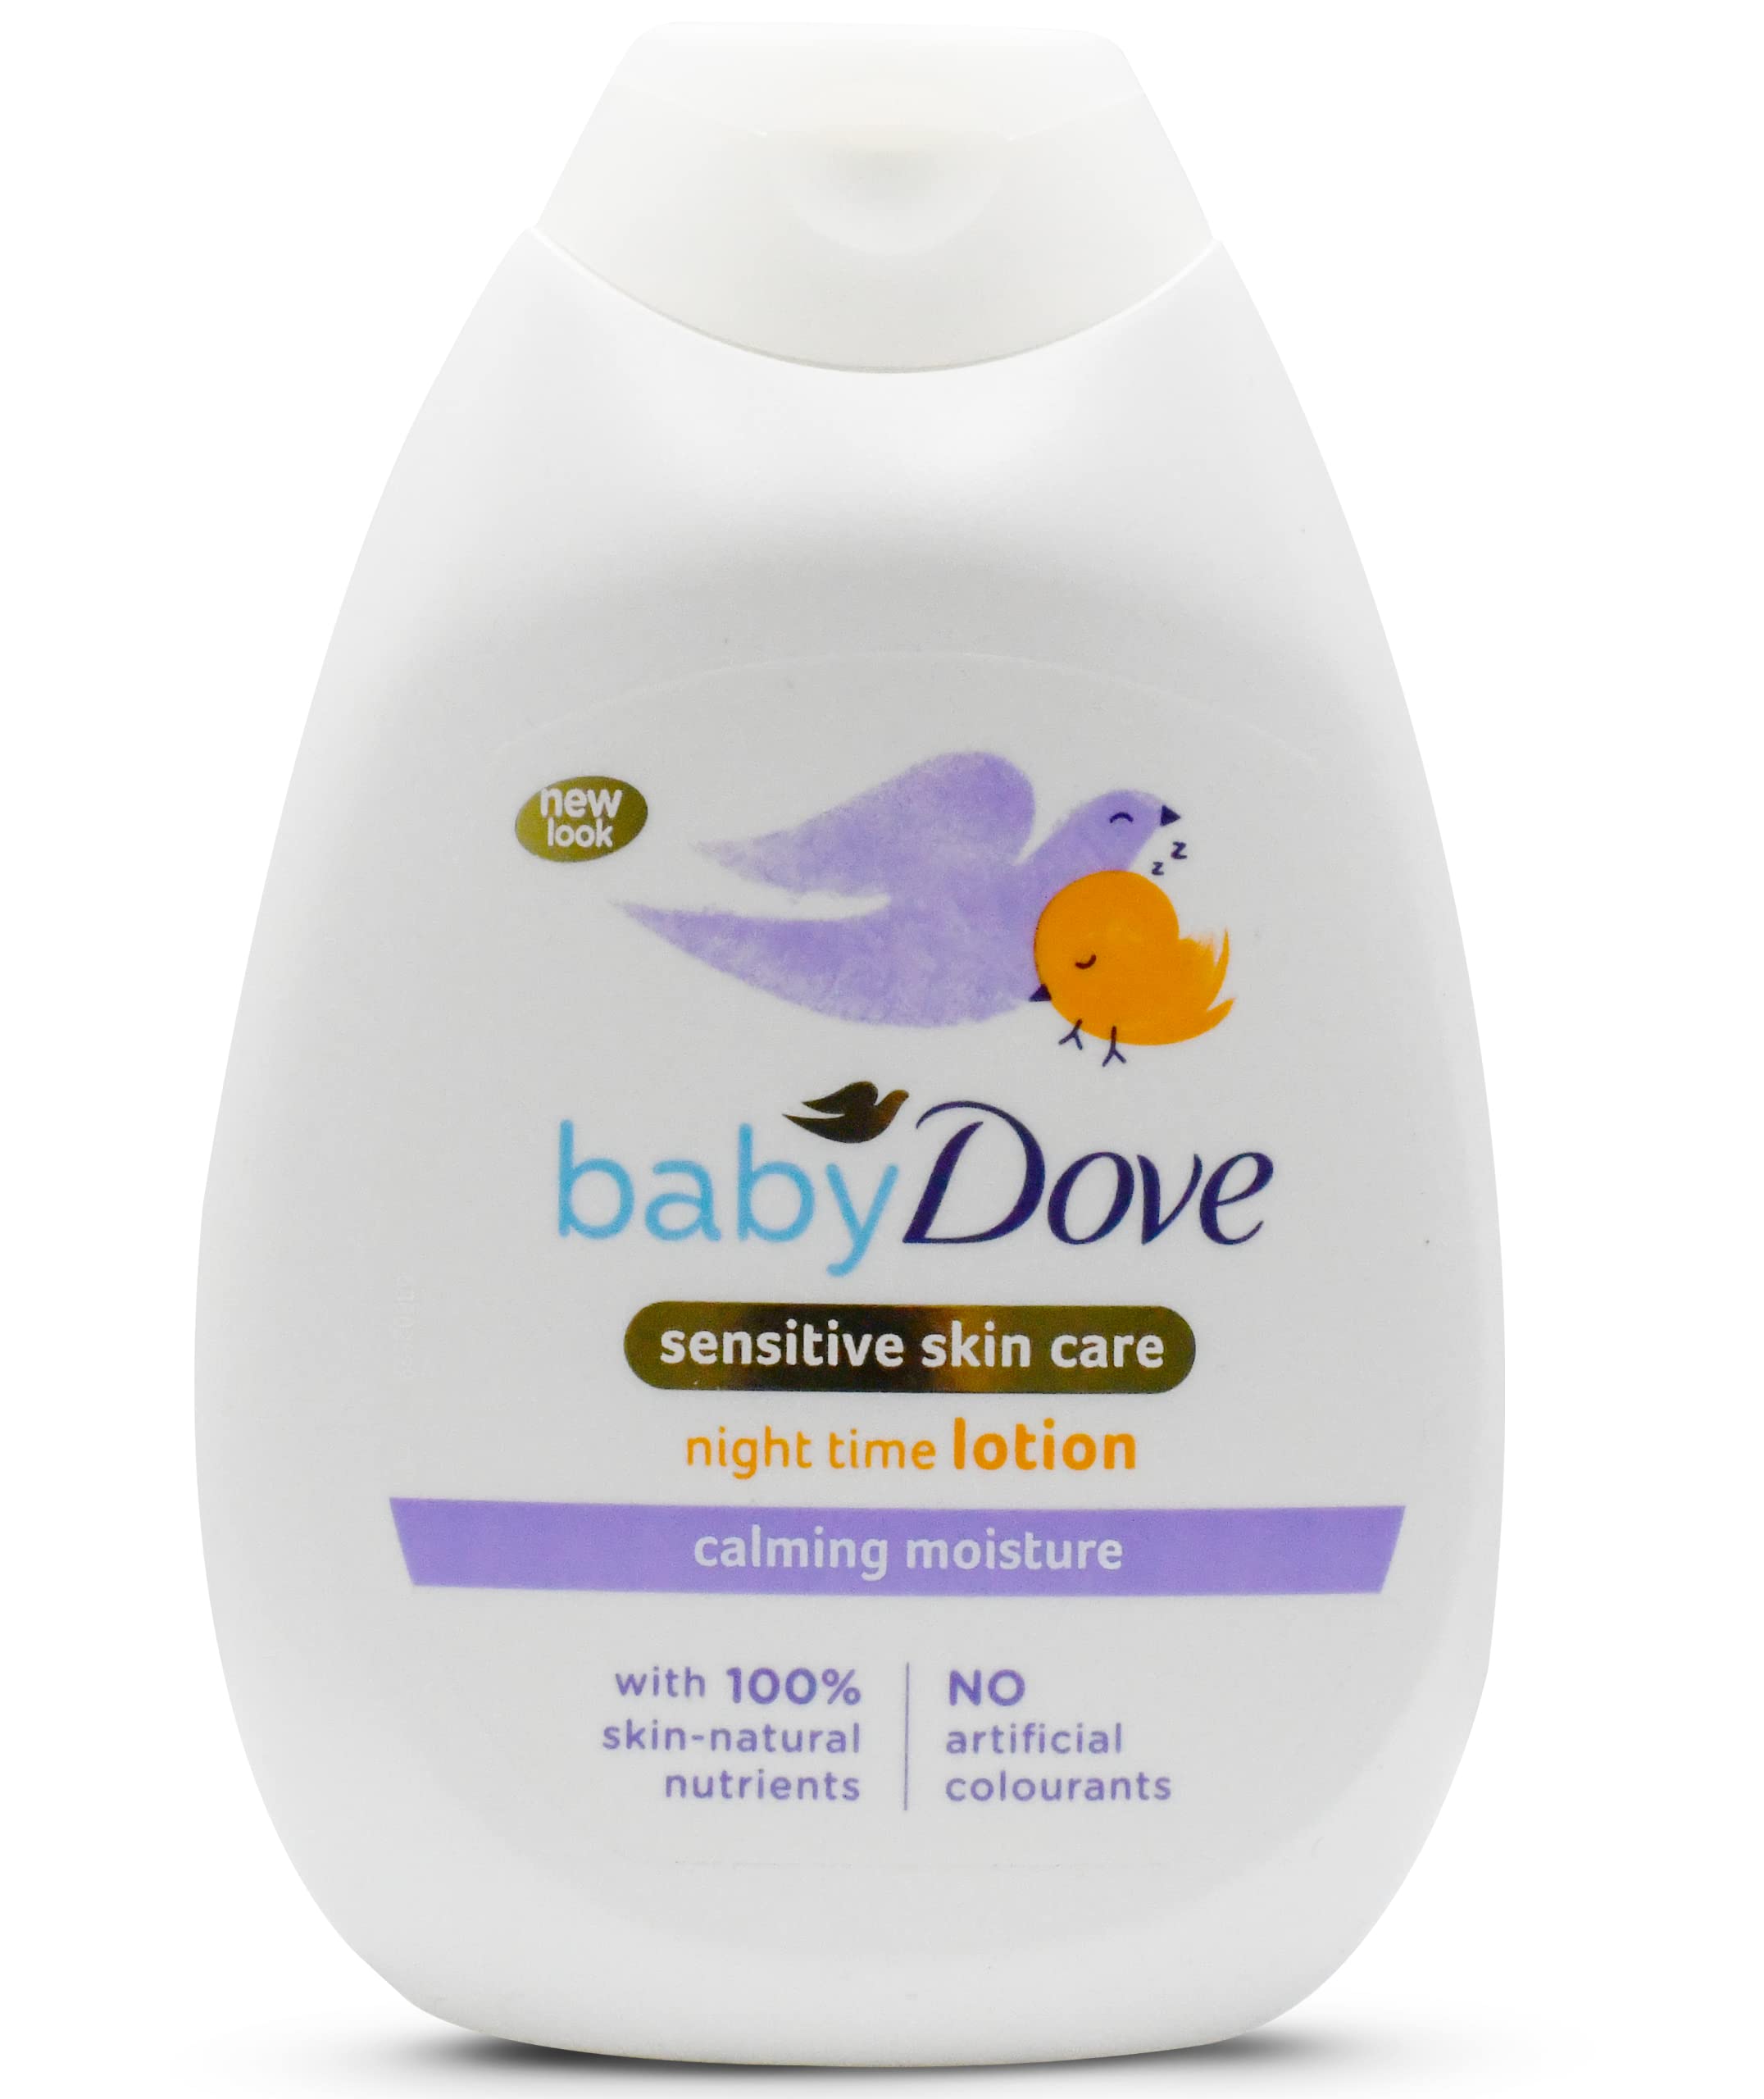 Baby Dove Night Time Lotion for Sensitive Skin Calming Moisture